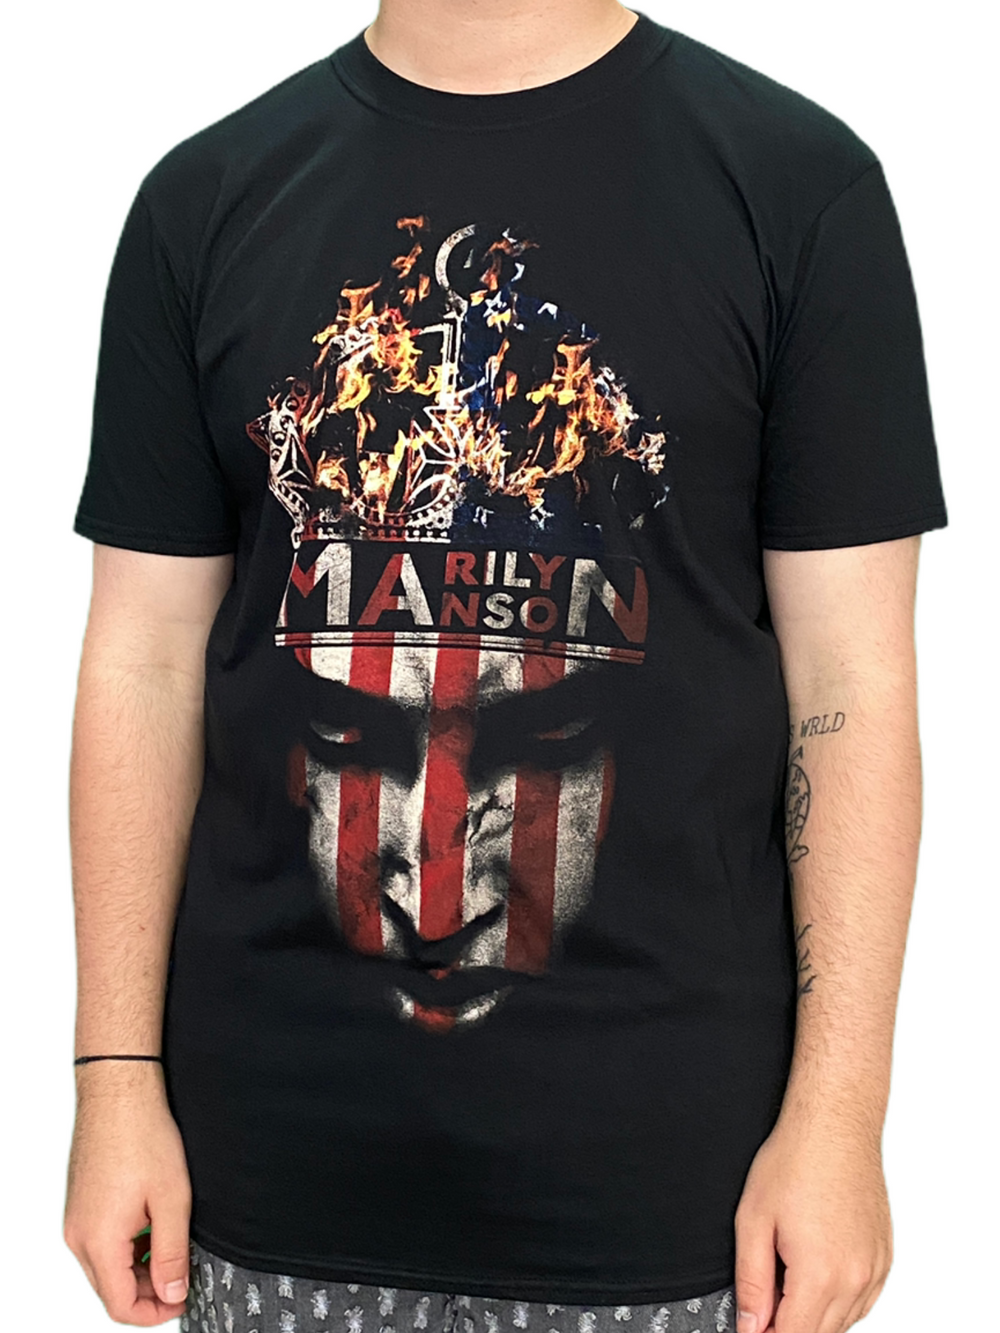 Marilyn Manson Crown Unisex Official Tee Shirt Brand New Various Sizes